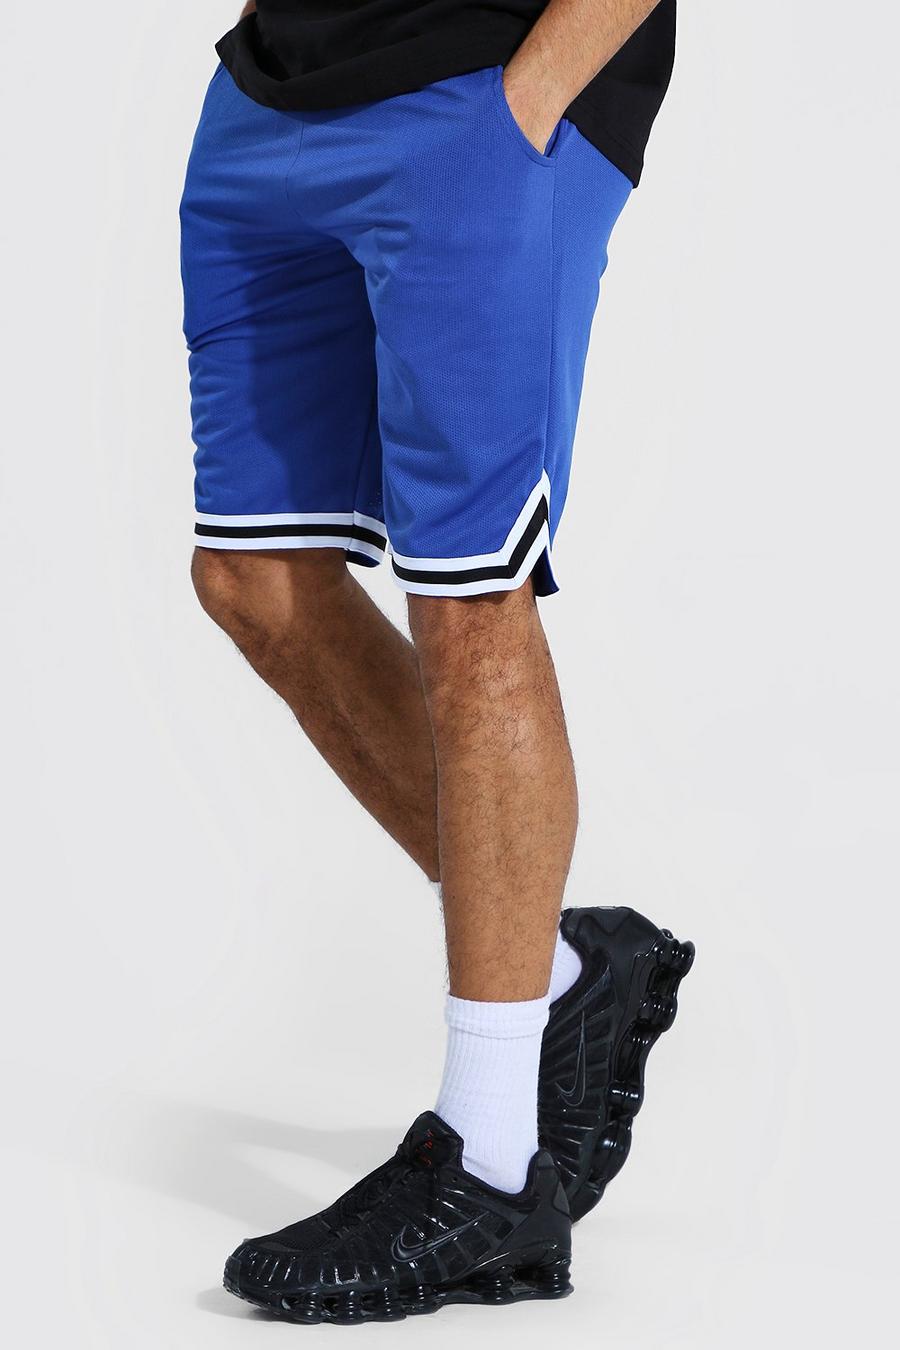 Blue Tall Mesh Basketball Shorts With Tape image number 1